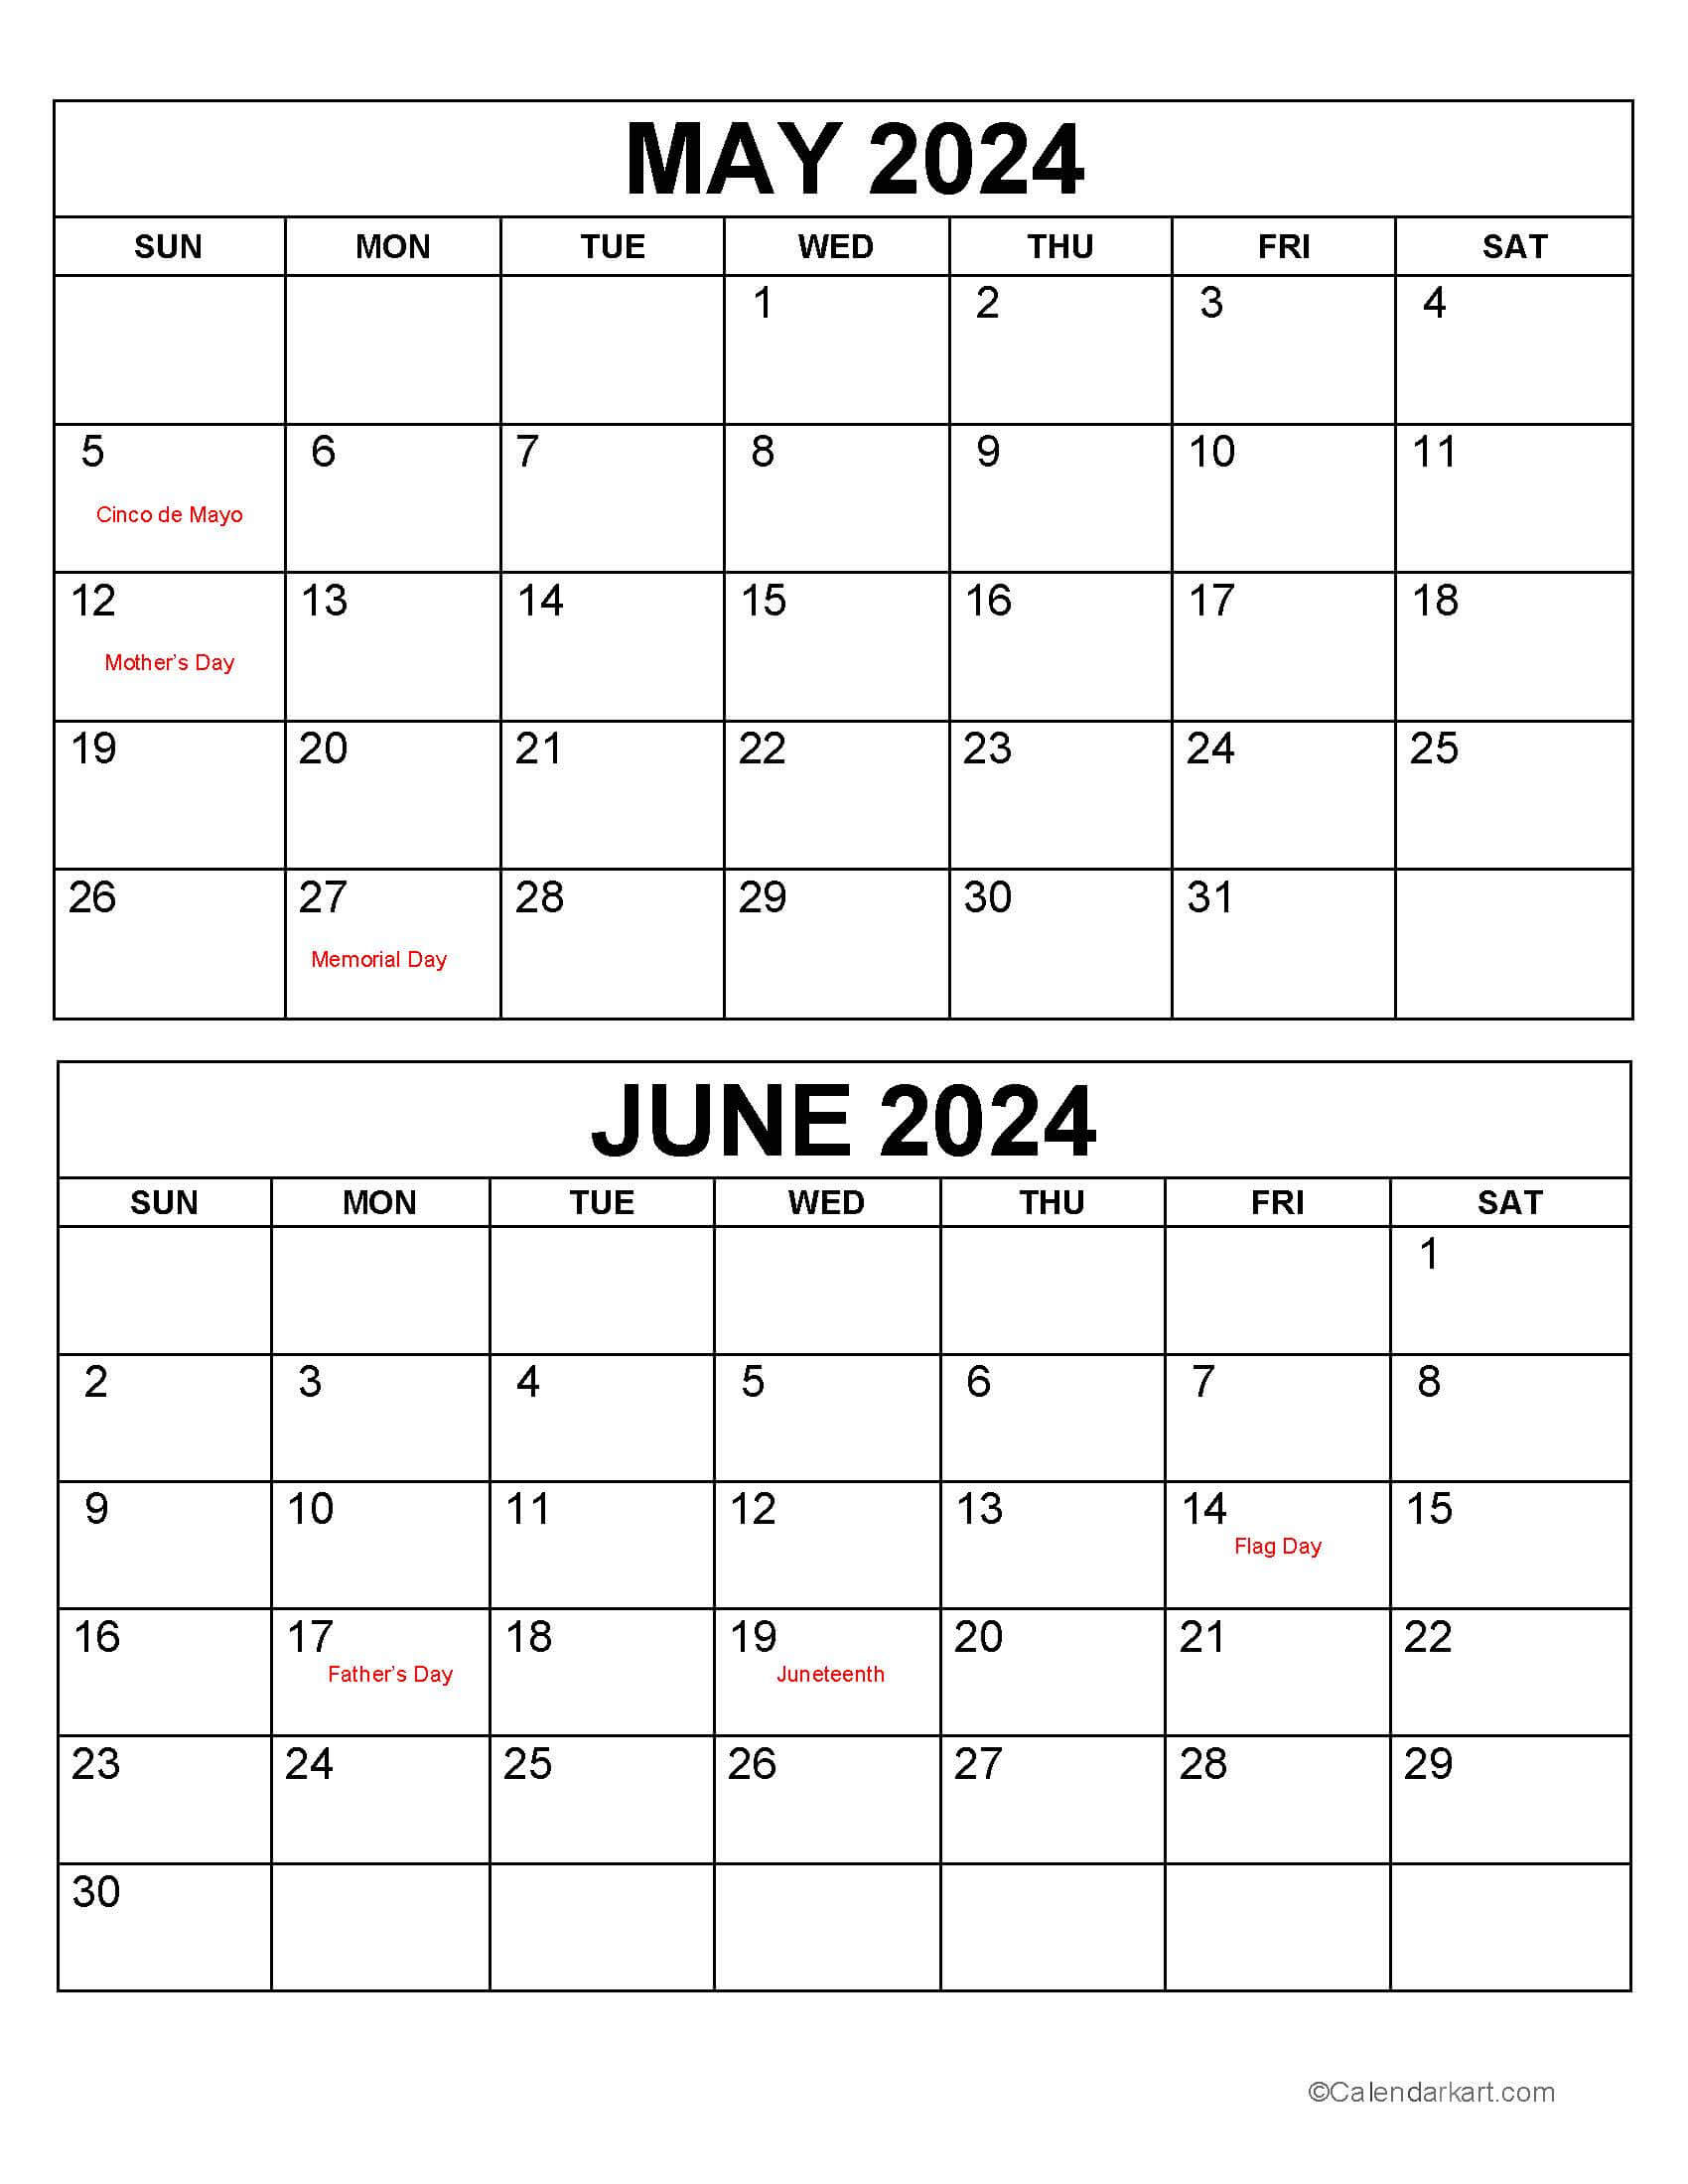 May June 2024 Calendars (3Rd Bi-Monthly) - Calendarkart with May And June 2024 Calendar With Holidays